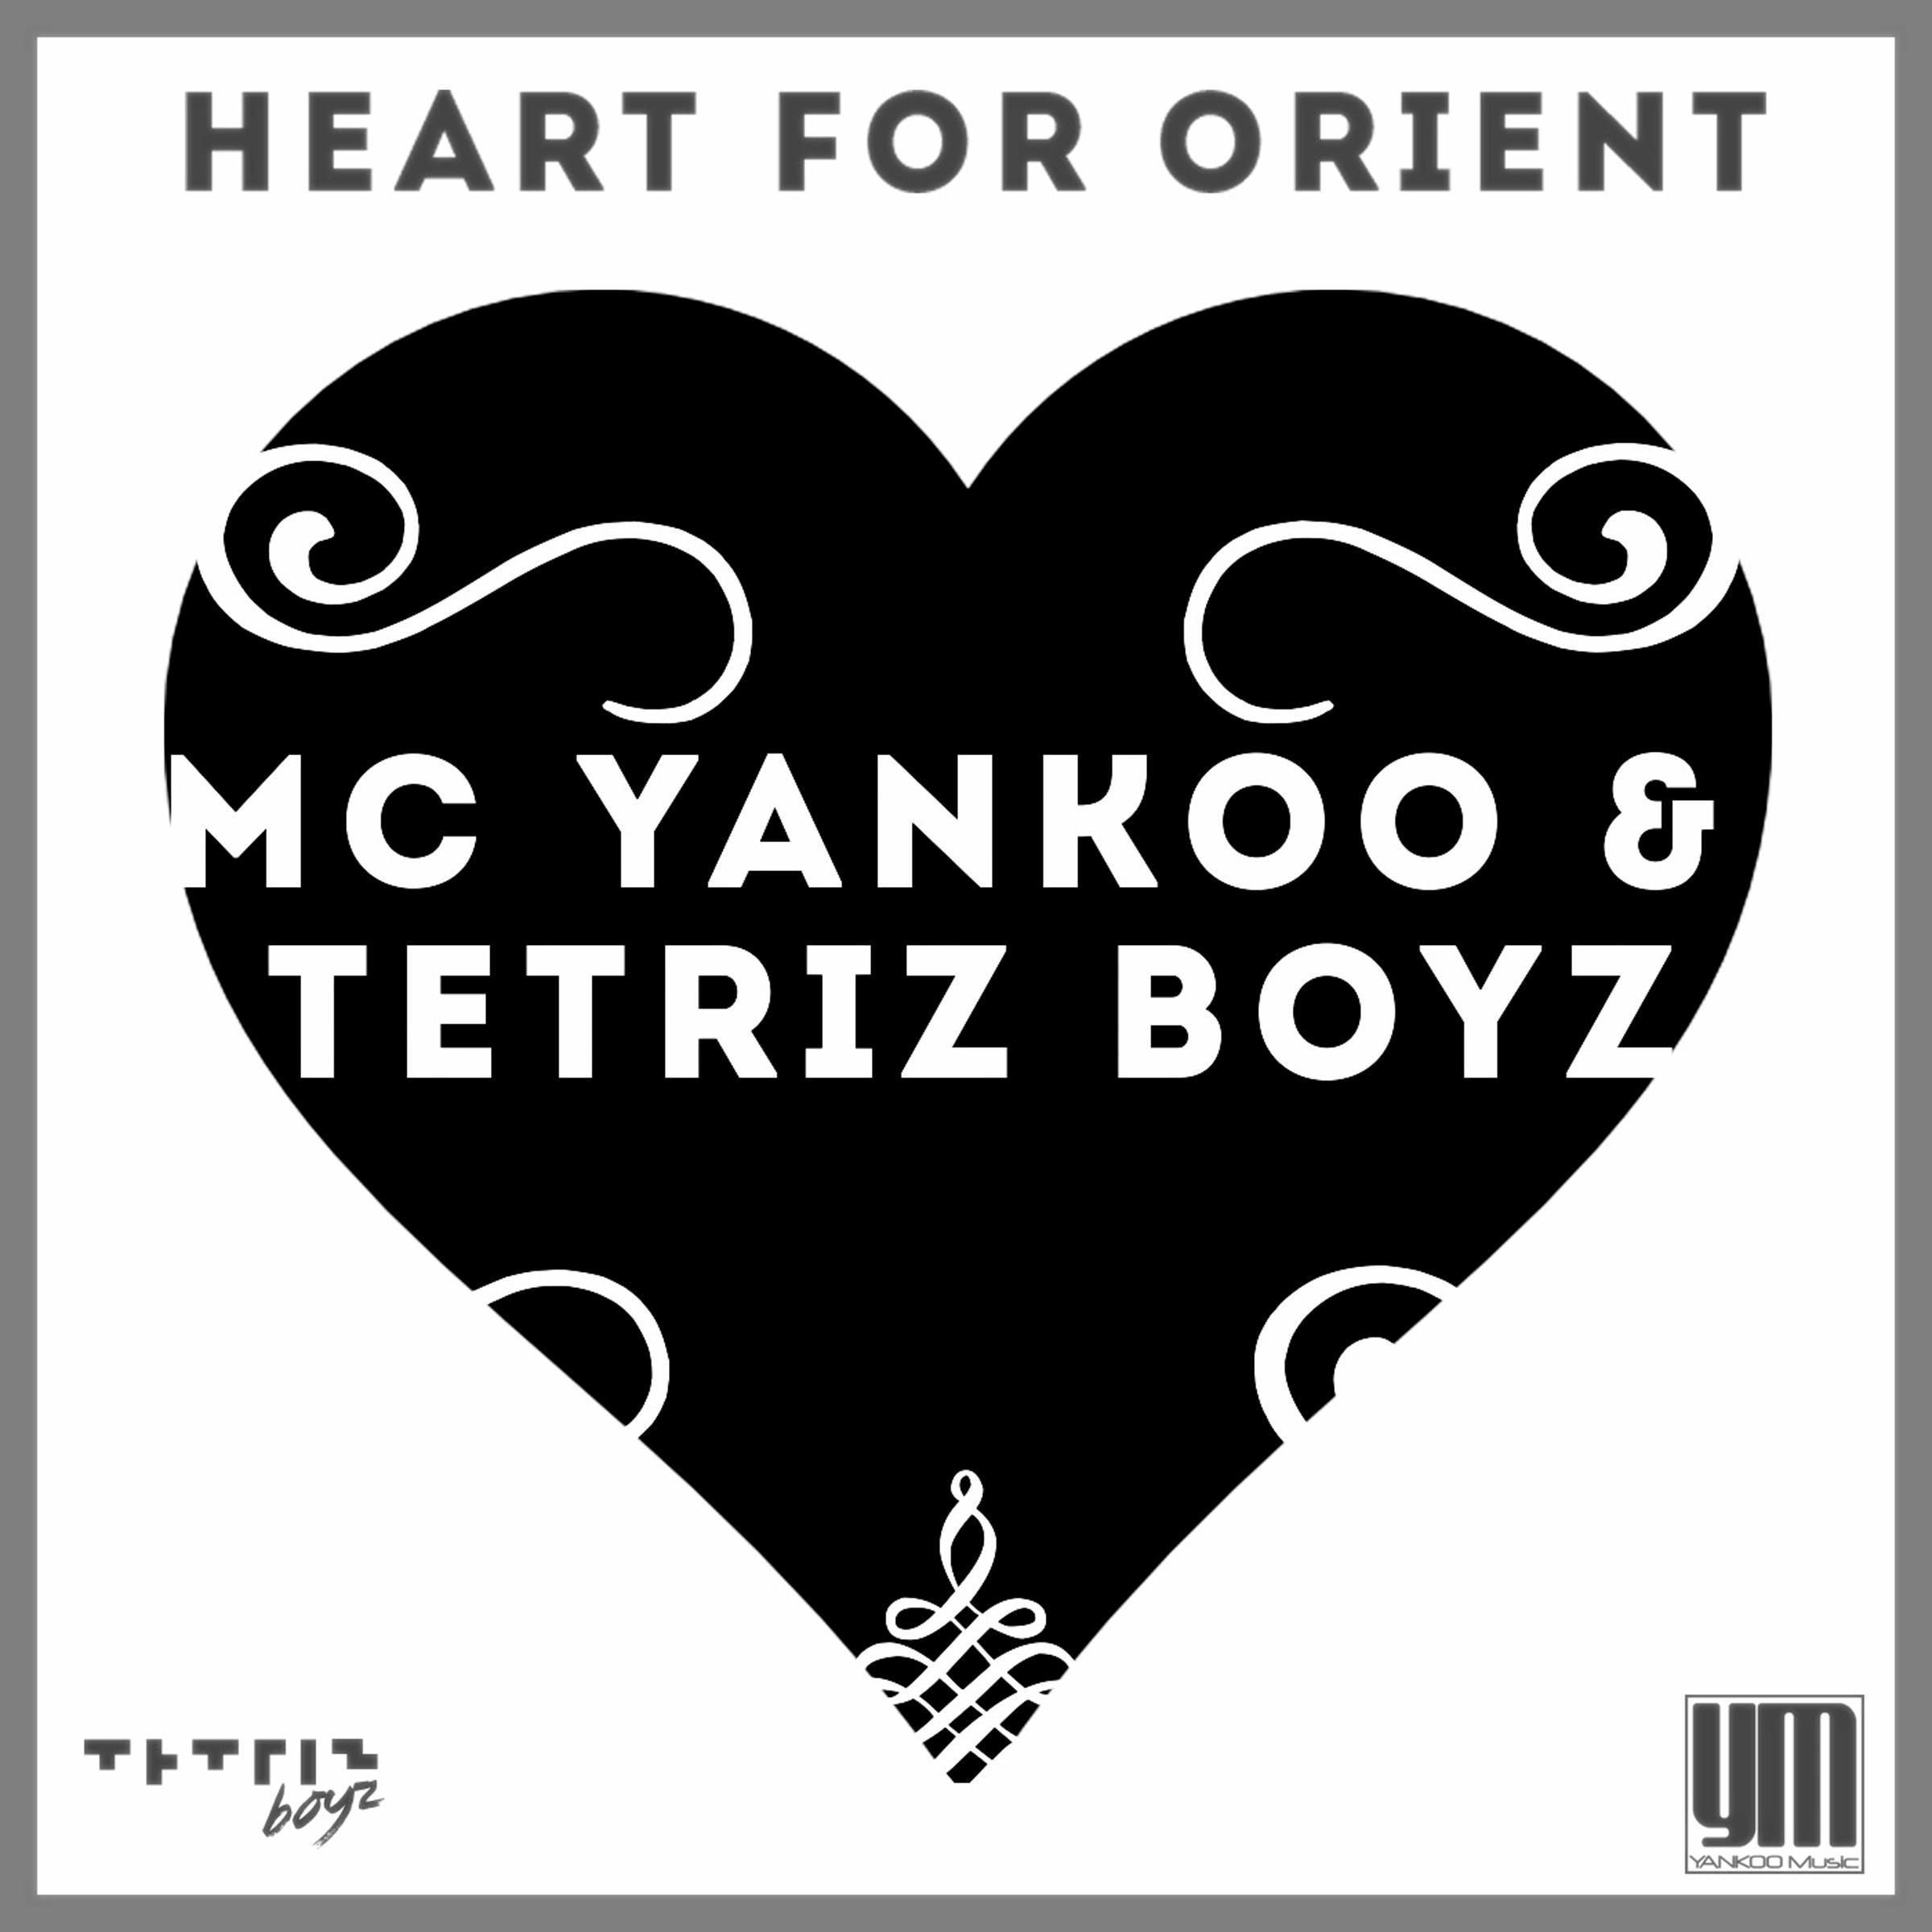 Heart for Orient